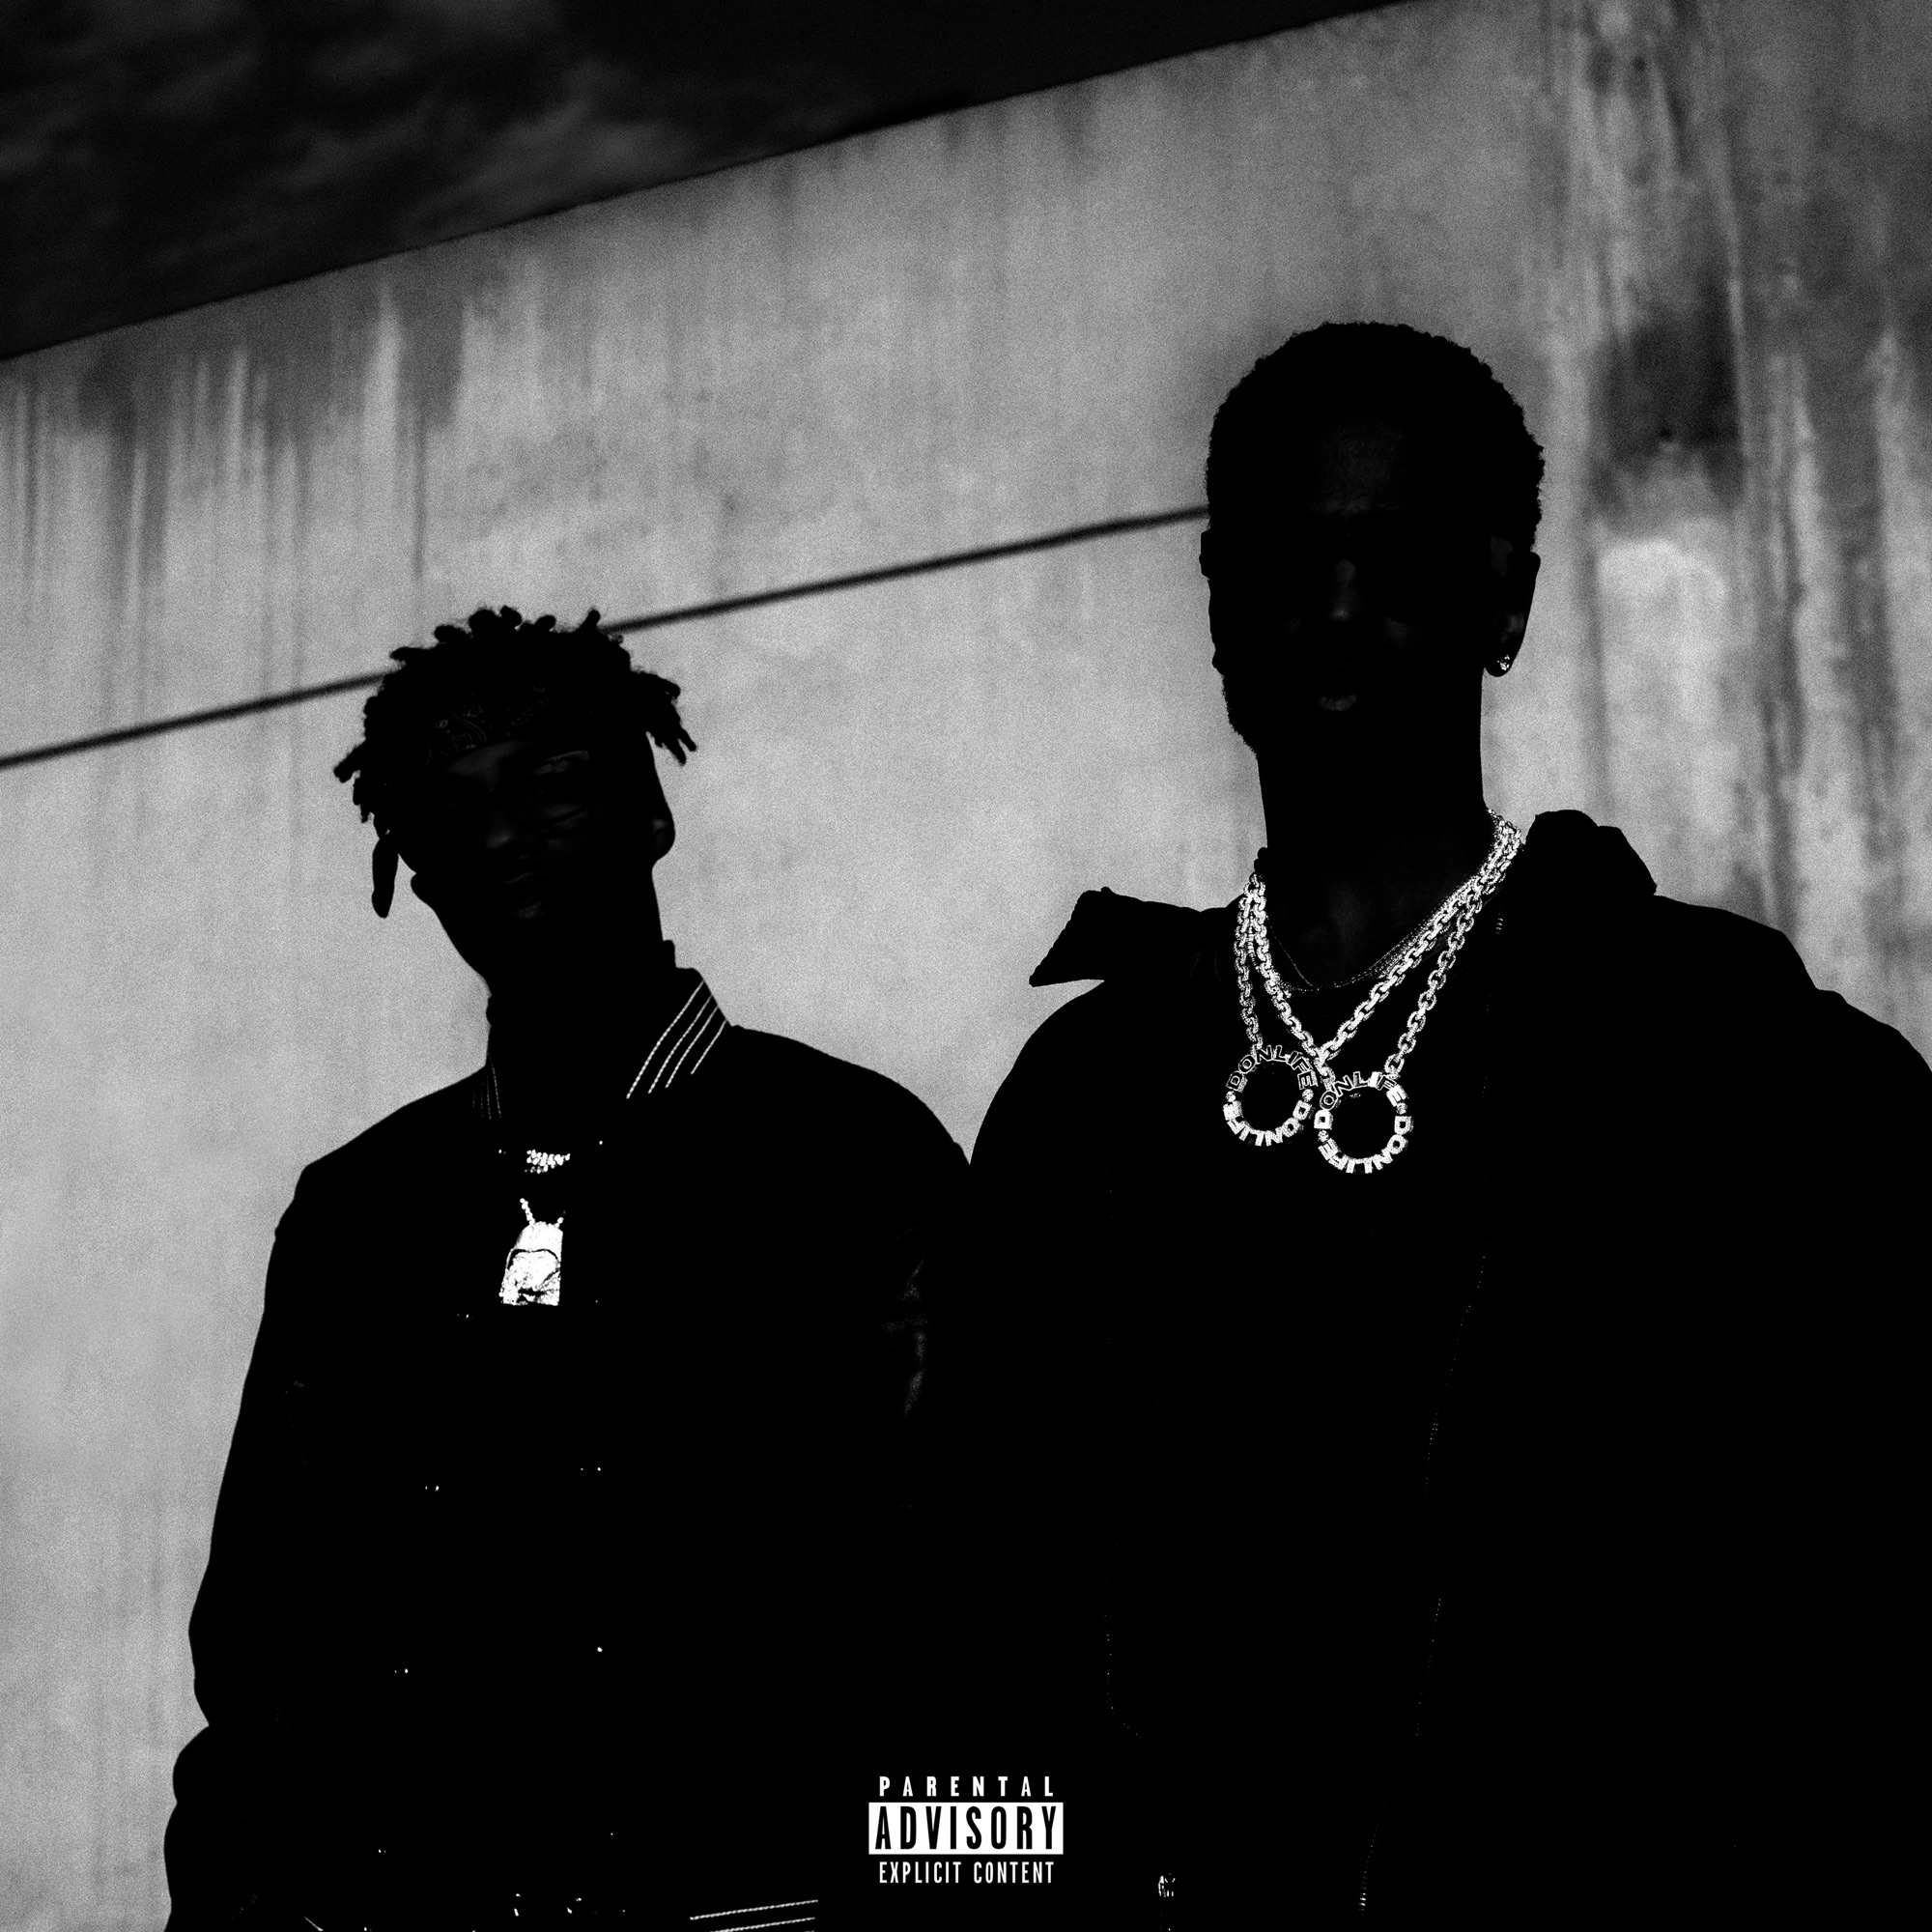 Art for So Good (feat. Kash Doll) by Big Sean & Metro Boomin